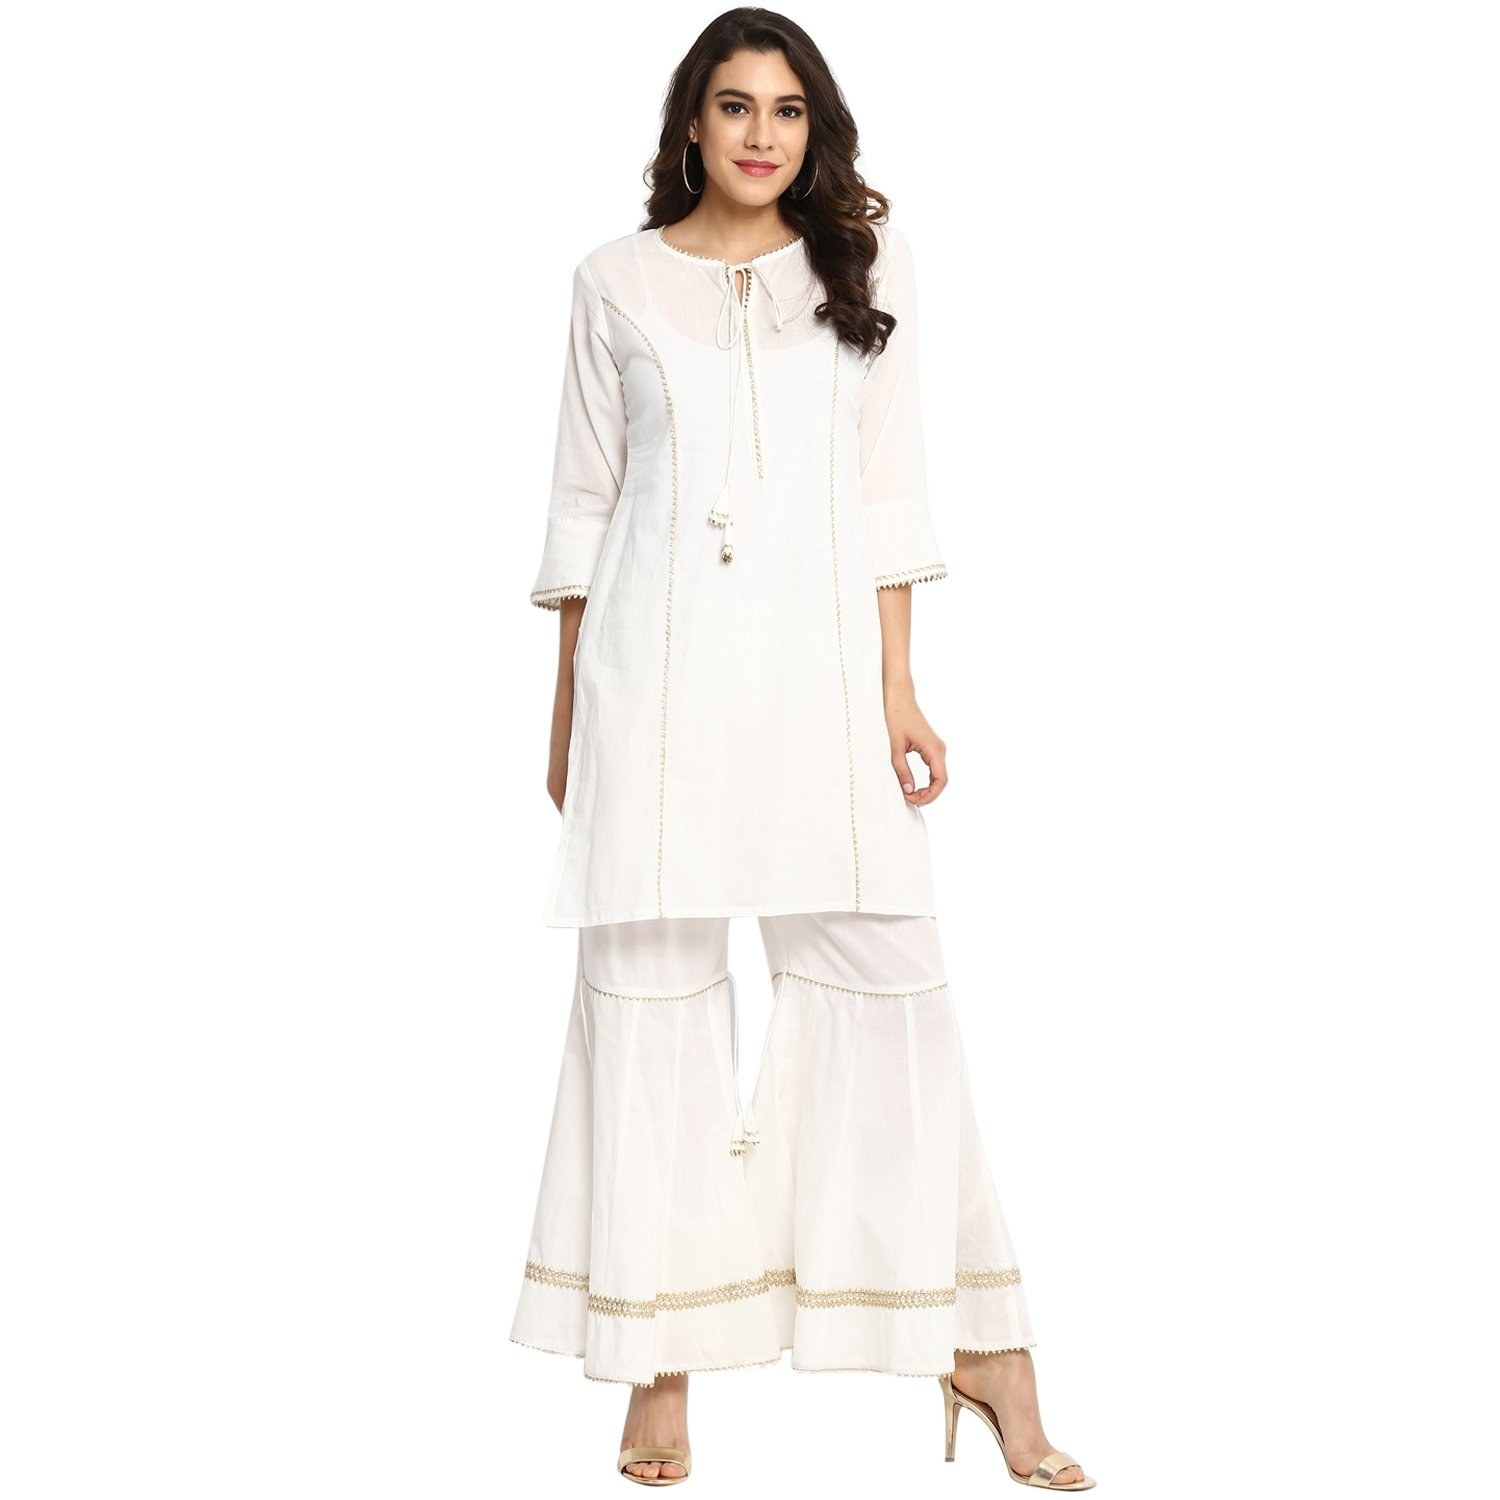 Pistaa's Women's Cotton Solid Kurta with Palazzo Bottom Set (Peach,  42-Large): Amazon.in: Clothing & Accessories | Clothes for women, Women,  Amazon dresses